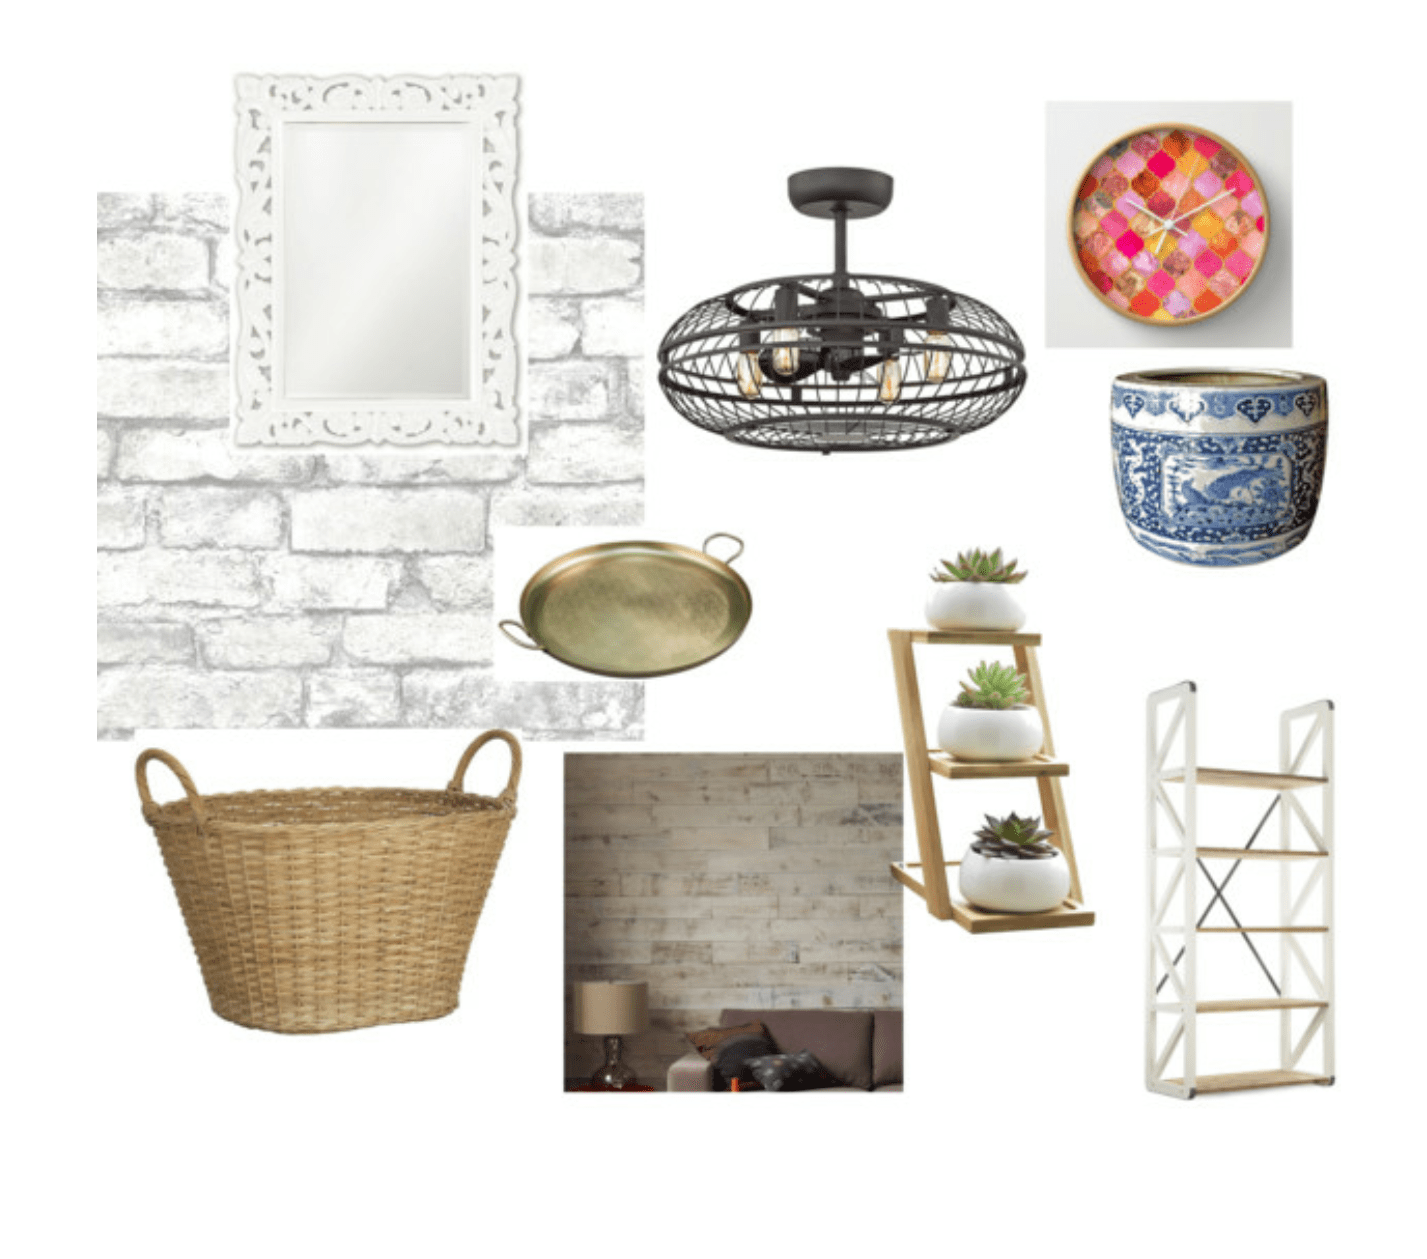 Urban Industrial Vintage Eclectic Glam Laundry Room Mood Board Polyvore